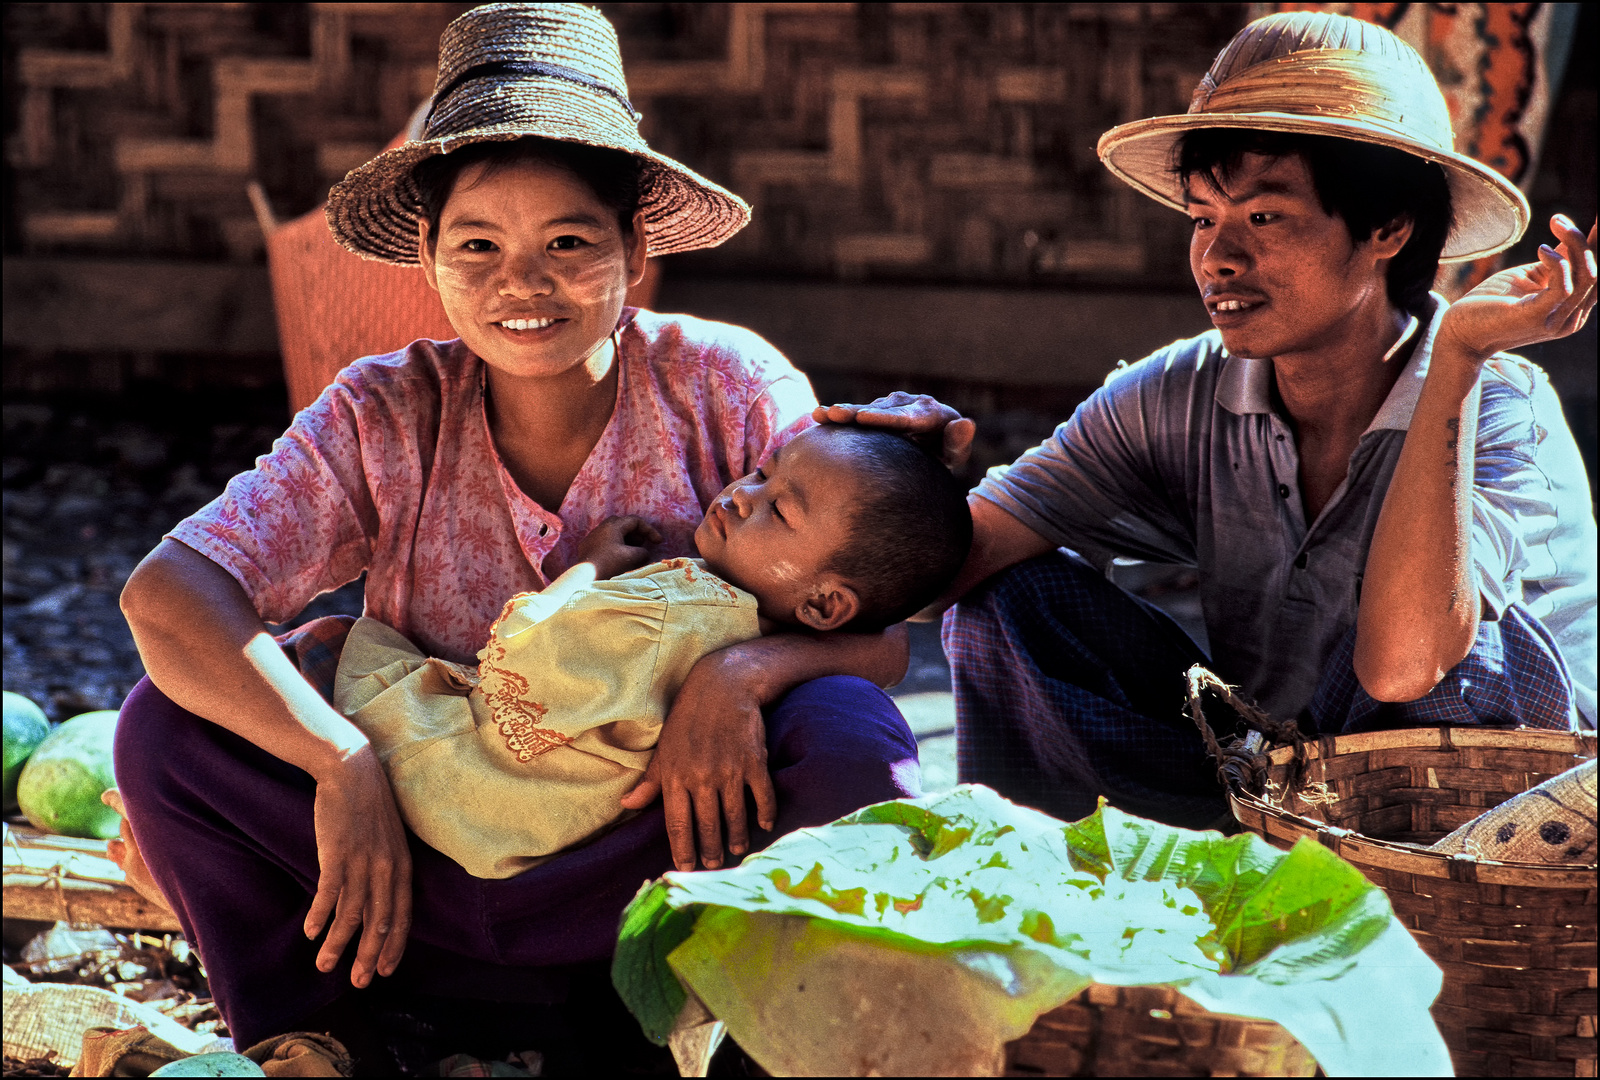 Family at the Market. Hsipaw, Shan State, Myanmar.